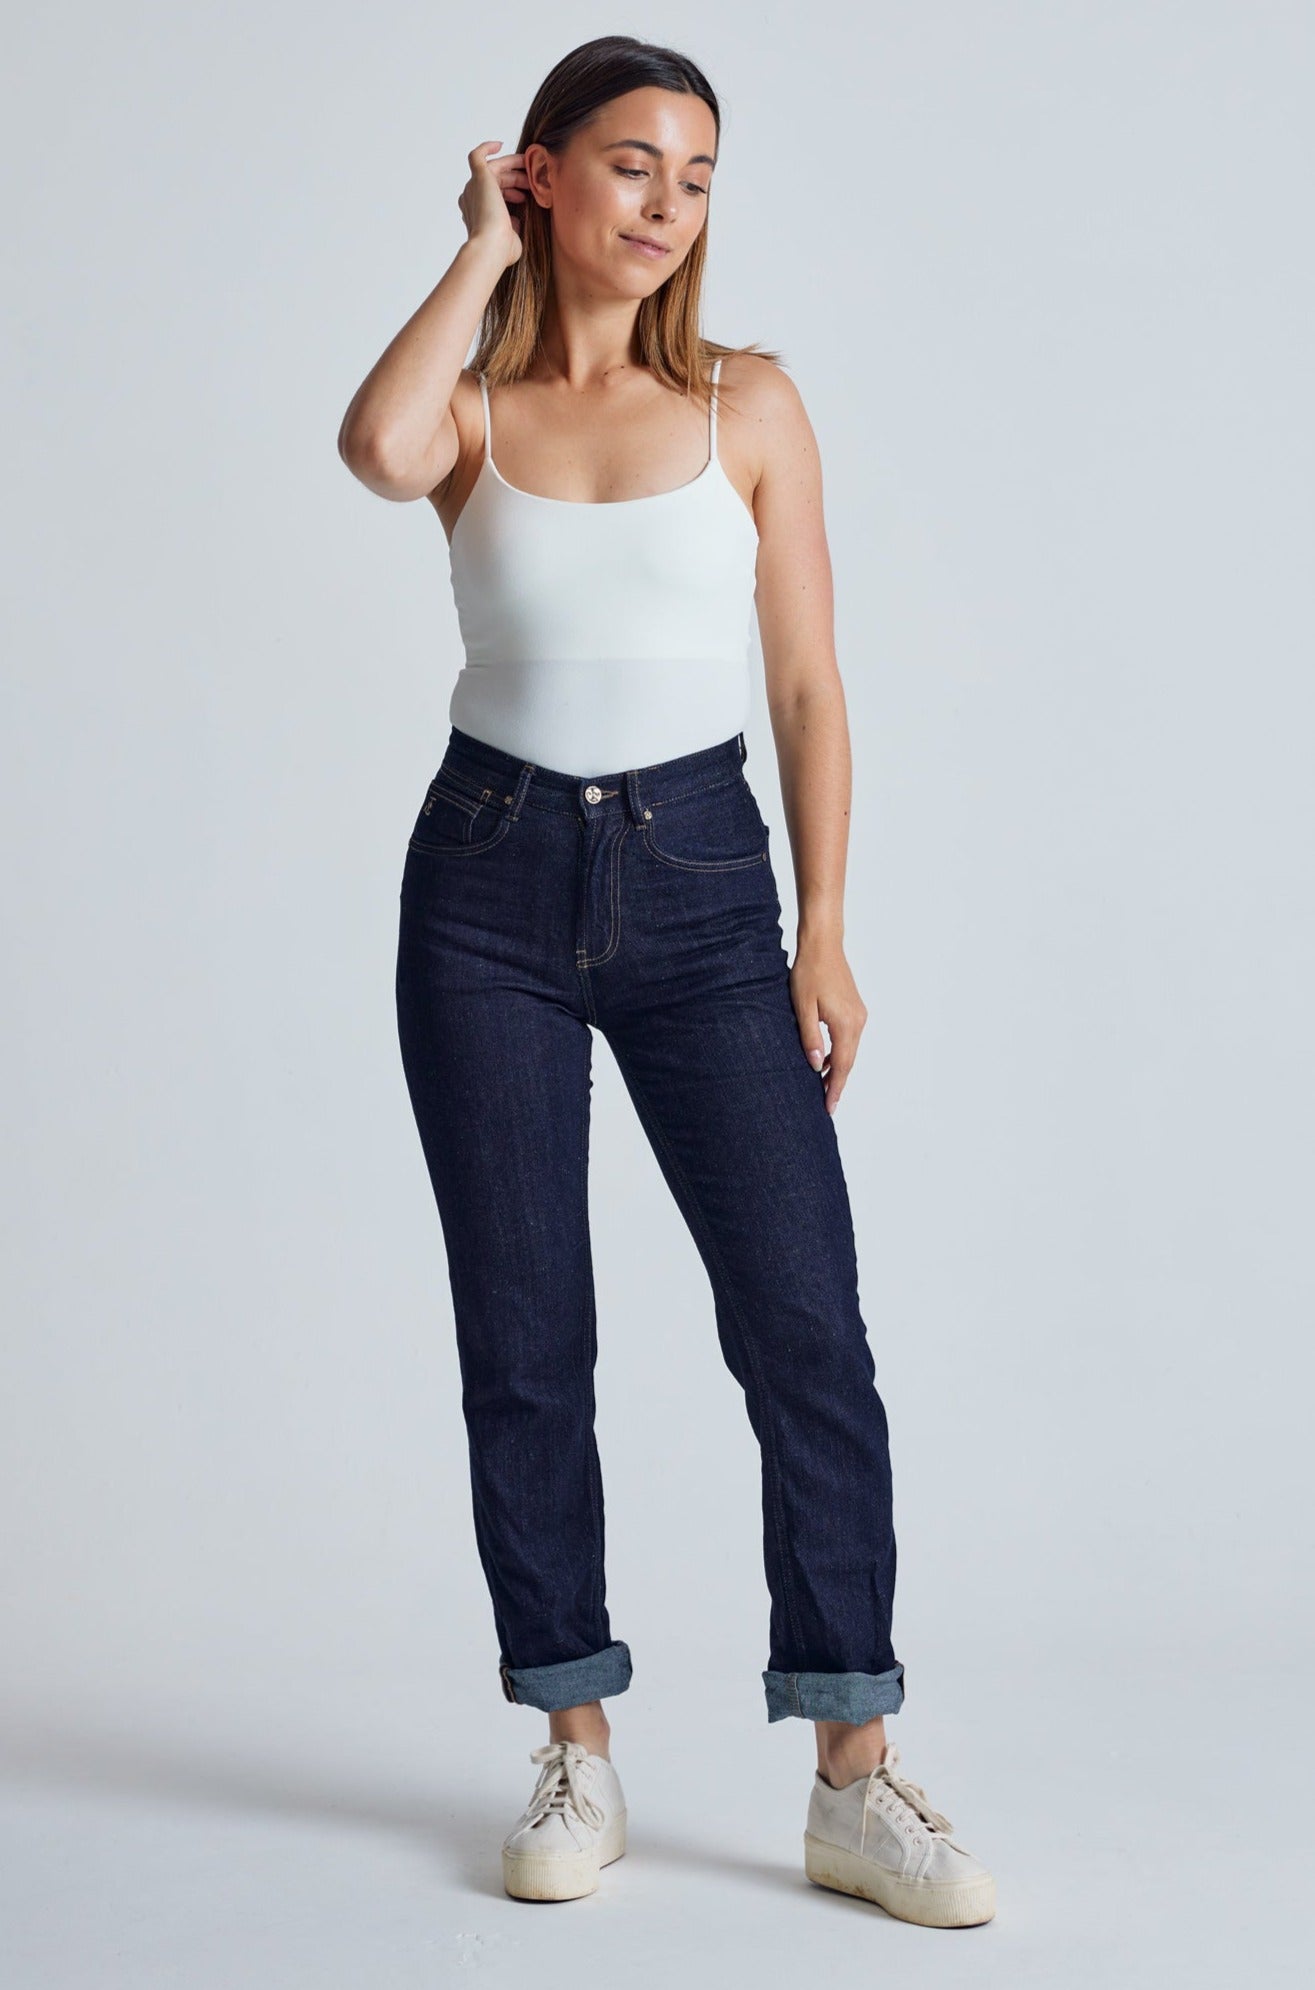 Rinse Indigo Lucille Tapered Jeans - GOTS Certified Organic Cotton And Hemp